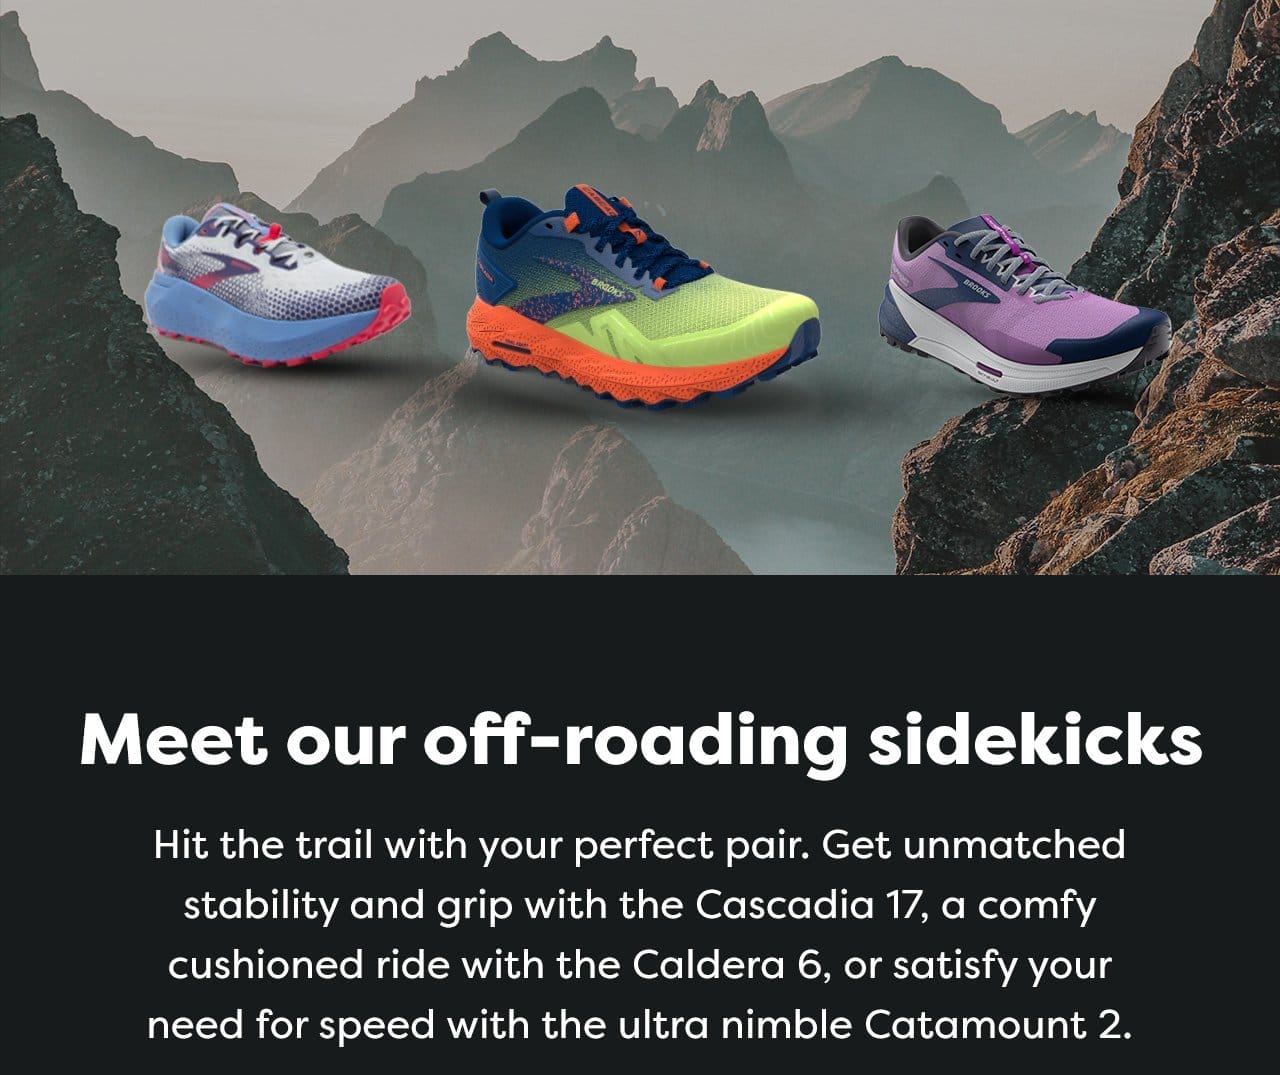 Meet our off-roading sidekicks - Hit the trail with your perfect pair. Get unmatched stability and grip with the Cascadia 17, a comfy cushioned ride with the Caldera 6, or satisfy your need for speed with the ultra nimble Catamount 3.